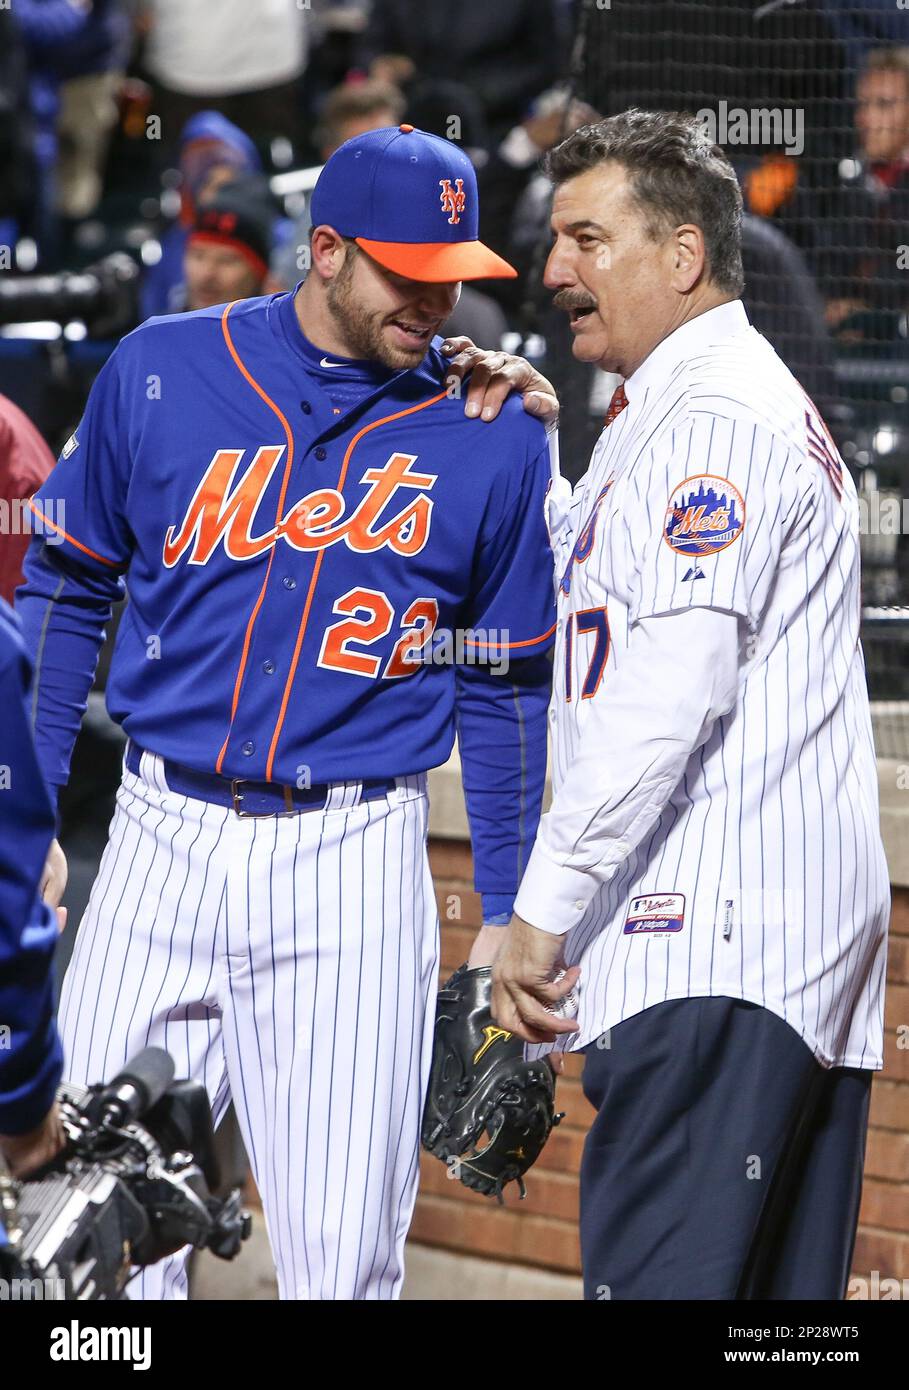 October 17, 2015: First baseman for the 1986 World Champion Mets, Keith  Hernandez (17) has a word with New York Mets catcher Kevin Plawecki (22)  [9785] prior to throwing out the ceremonial